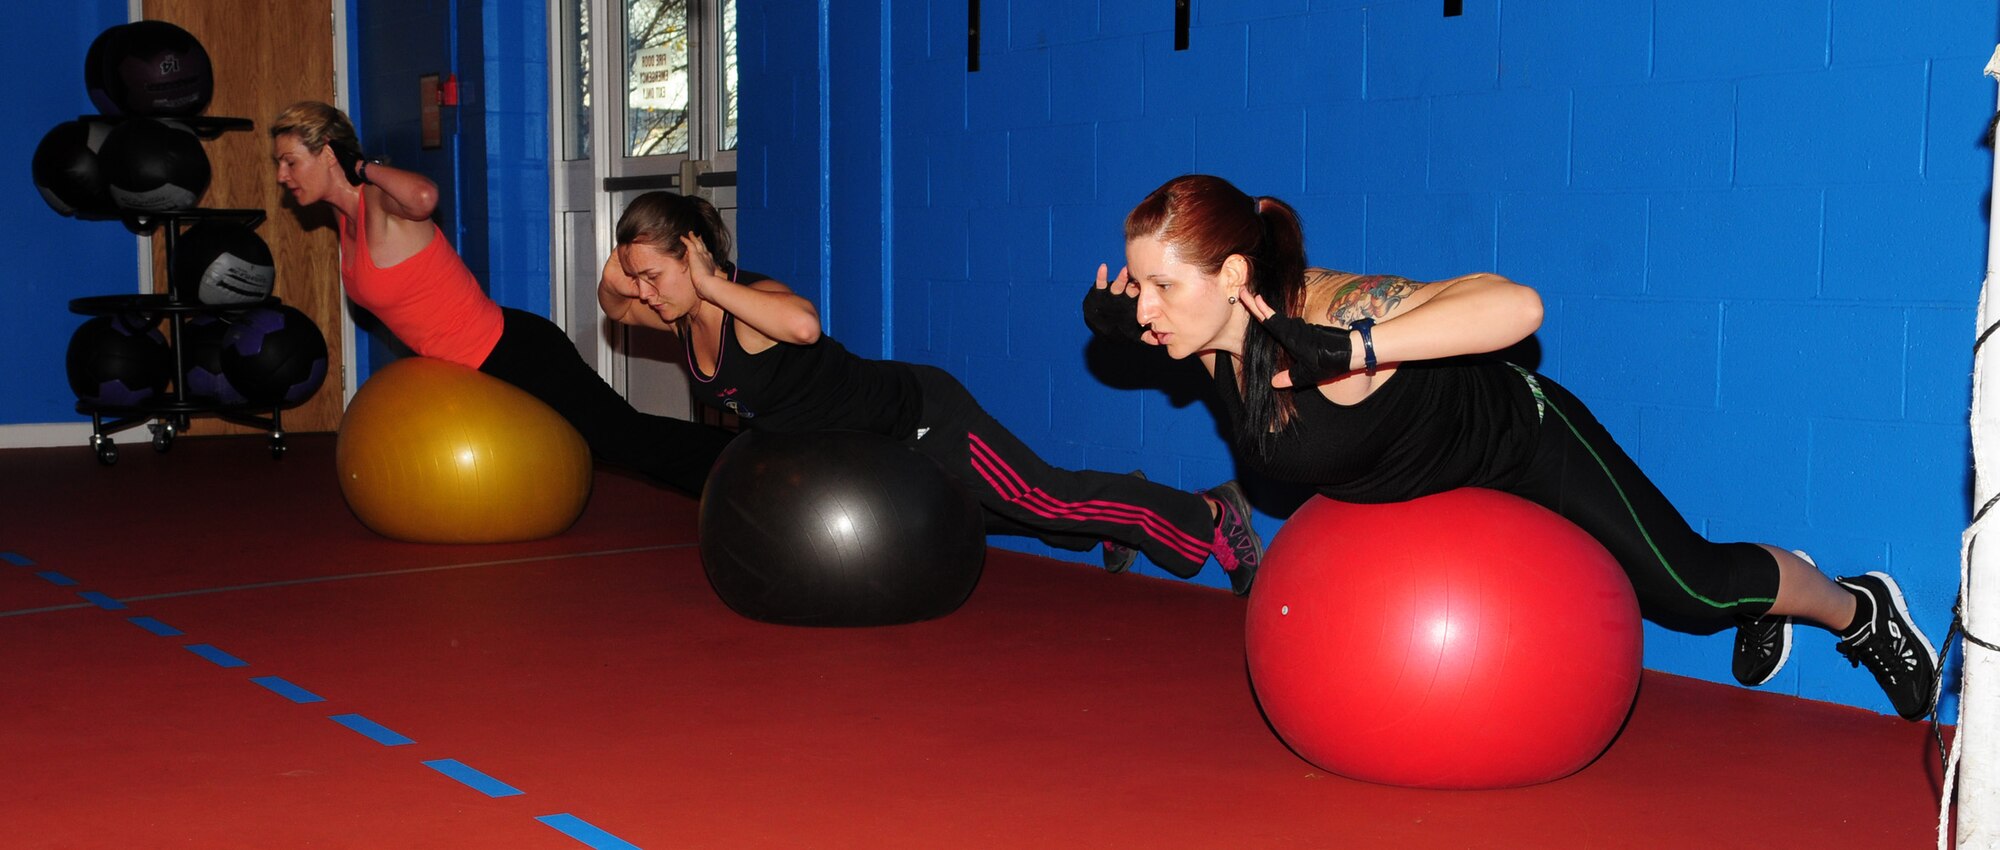 From left, Shana Williams, 100th Security Forces Squadron spouse; Pamela Walker, 321st Special Tactics Squadron spouse; and instructor Brandy Willaman, 48th Component Repair Squadron spouse, perform exercises on fitness balls Nov. 30, 2012, at the North Side Fitness Center, RAF Mildenhall, England. The one-hour class, held Mondays, Wednesdays and Fridays at 9:30 a.m., is one of many offered at the fitness centers on base. (U.S. Air Force photo by Karen Abeyasekere)